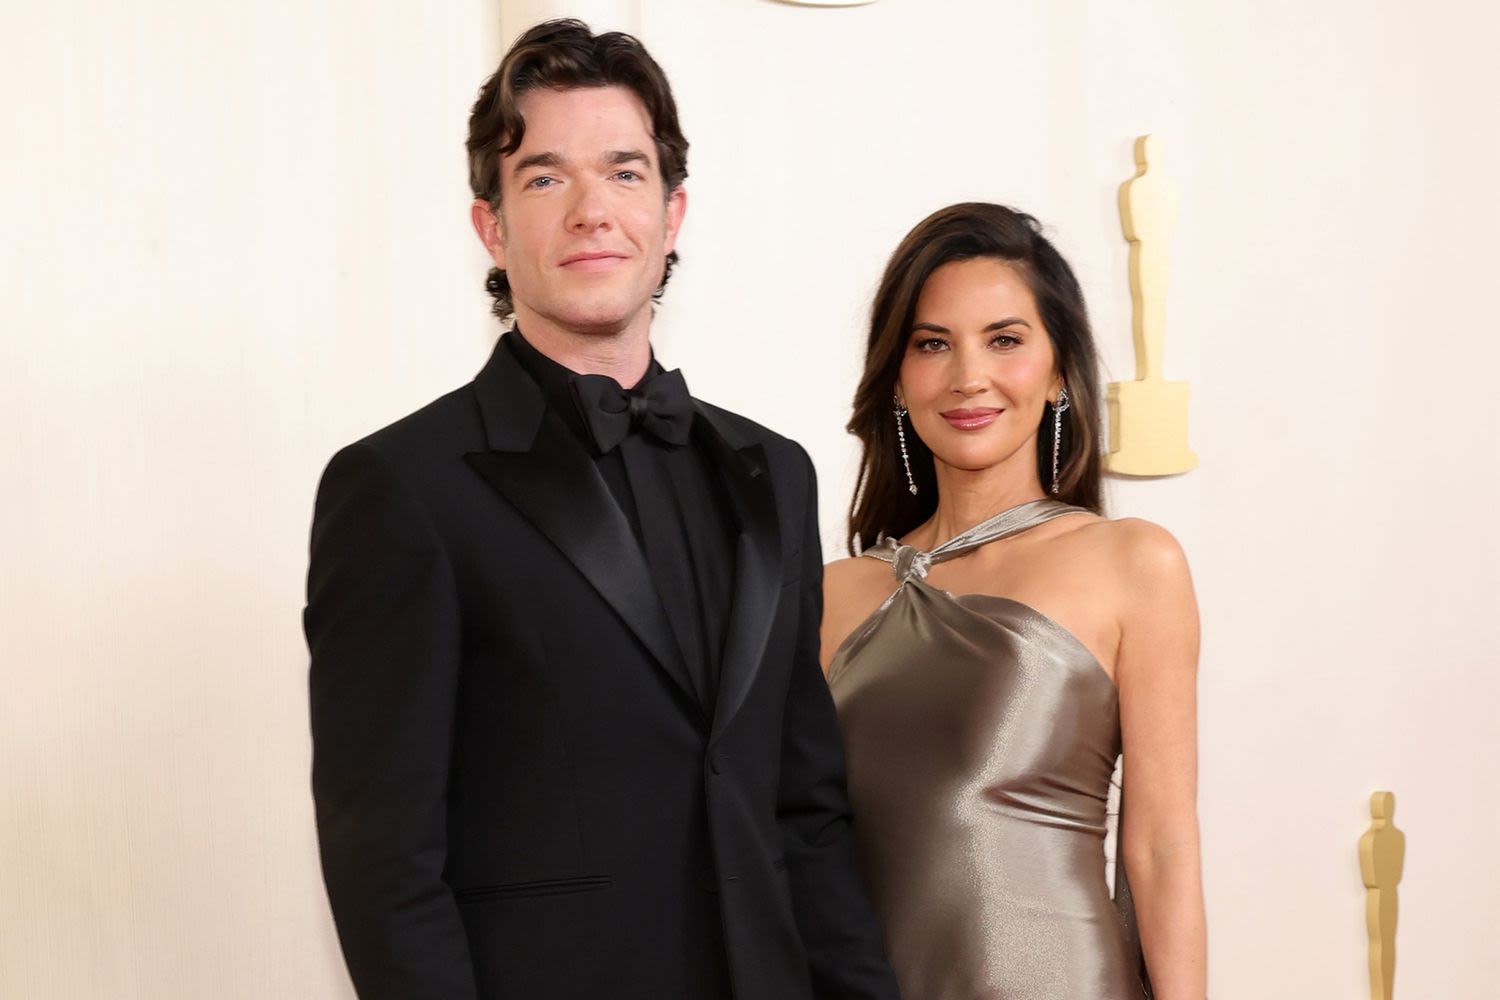 John Mulaney and Olivia Munn are married in New York wedding